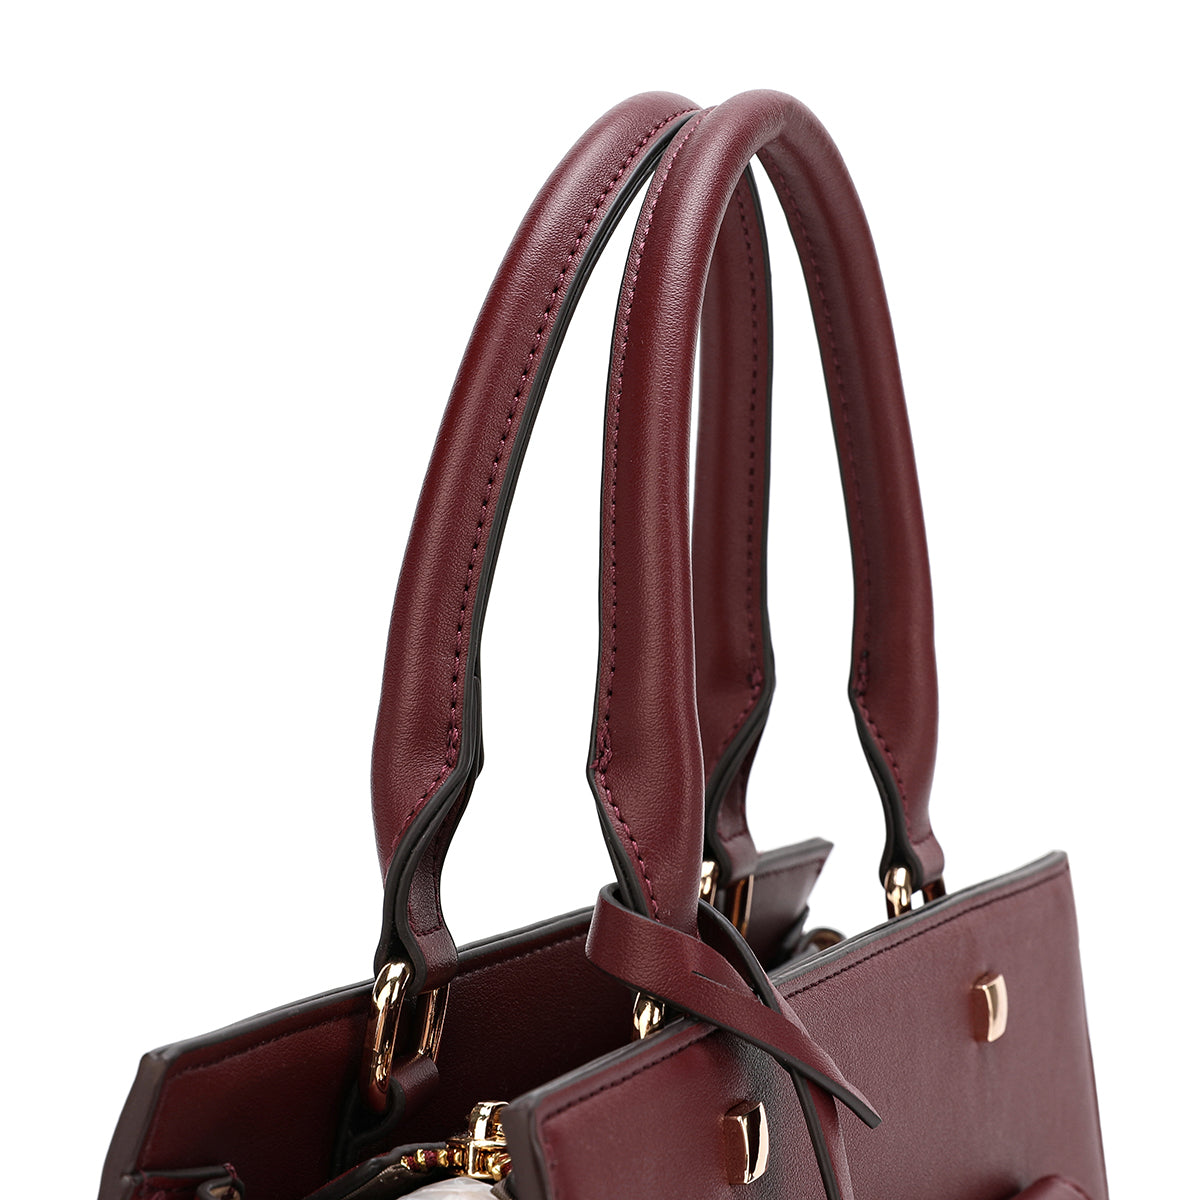 An organized women's handbag with an outer pocket, width 29 cm, in two colors